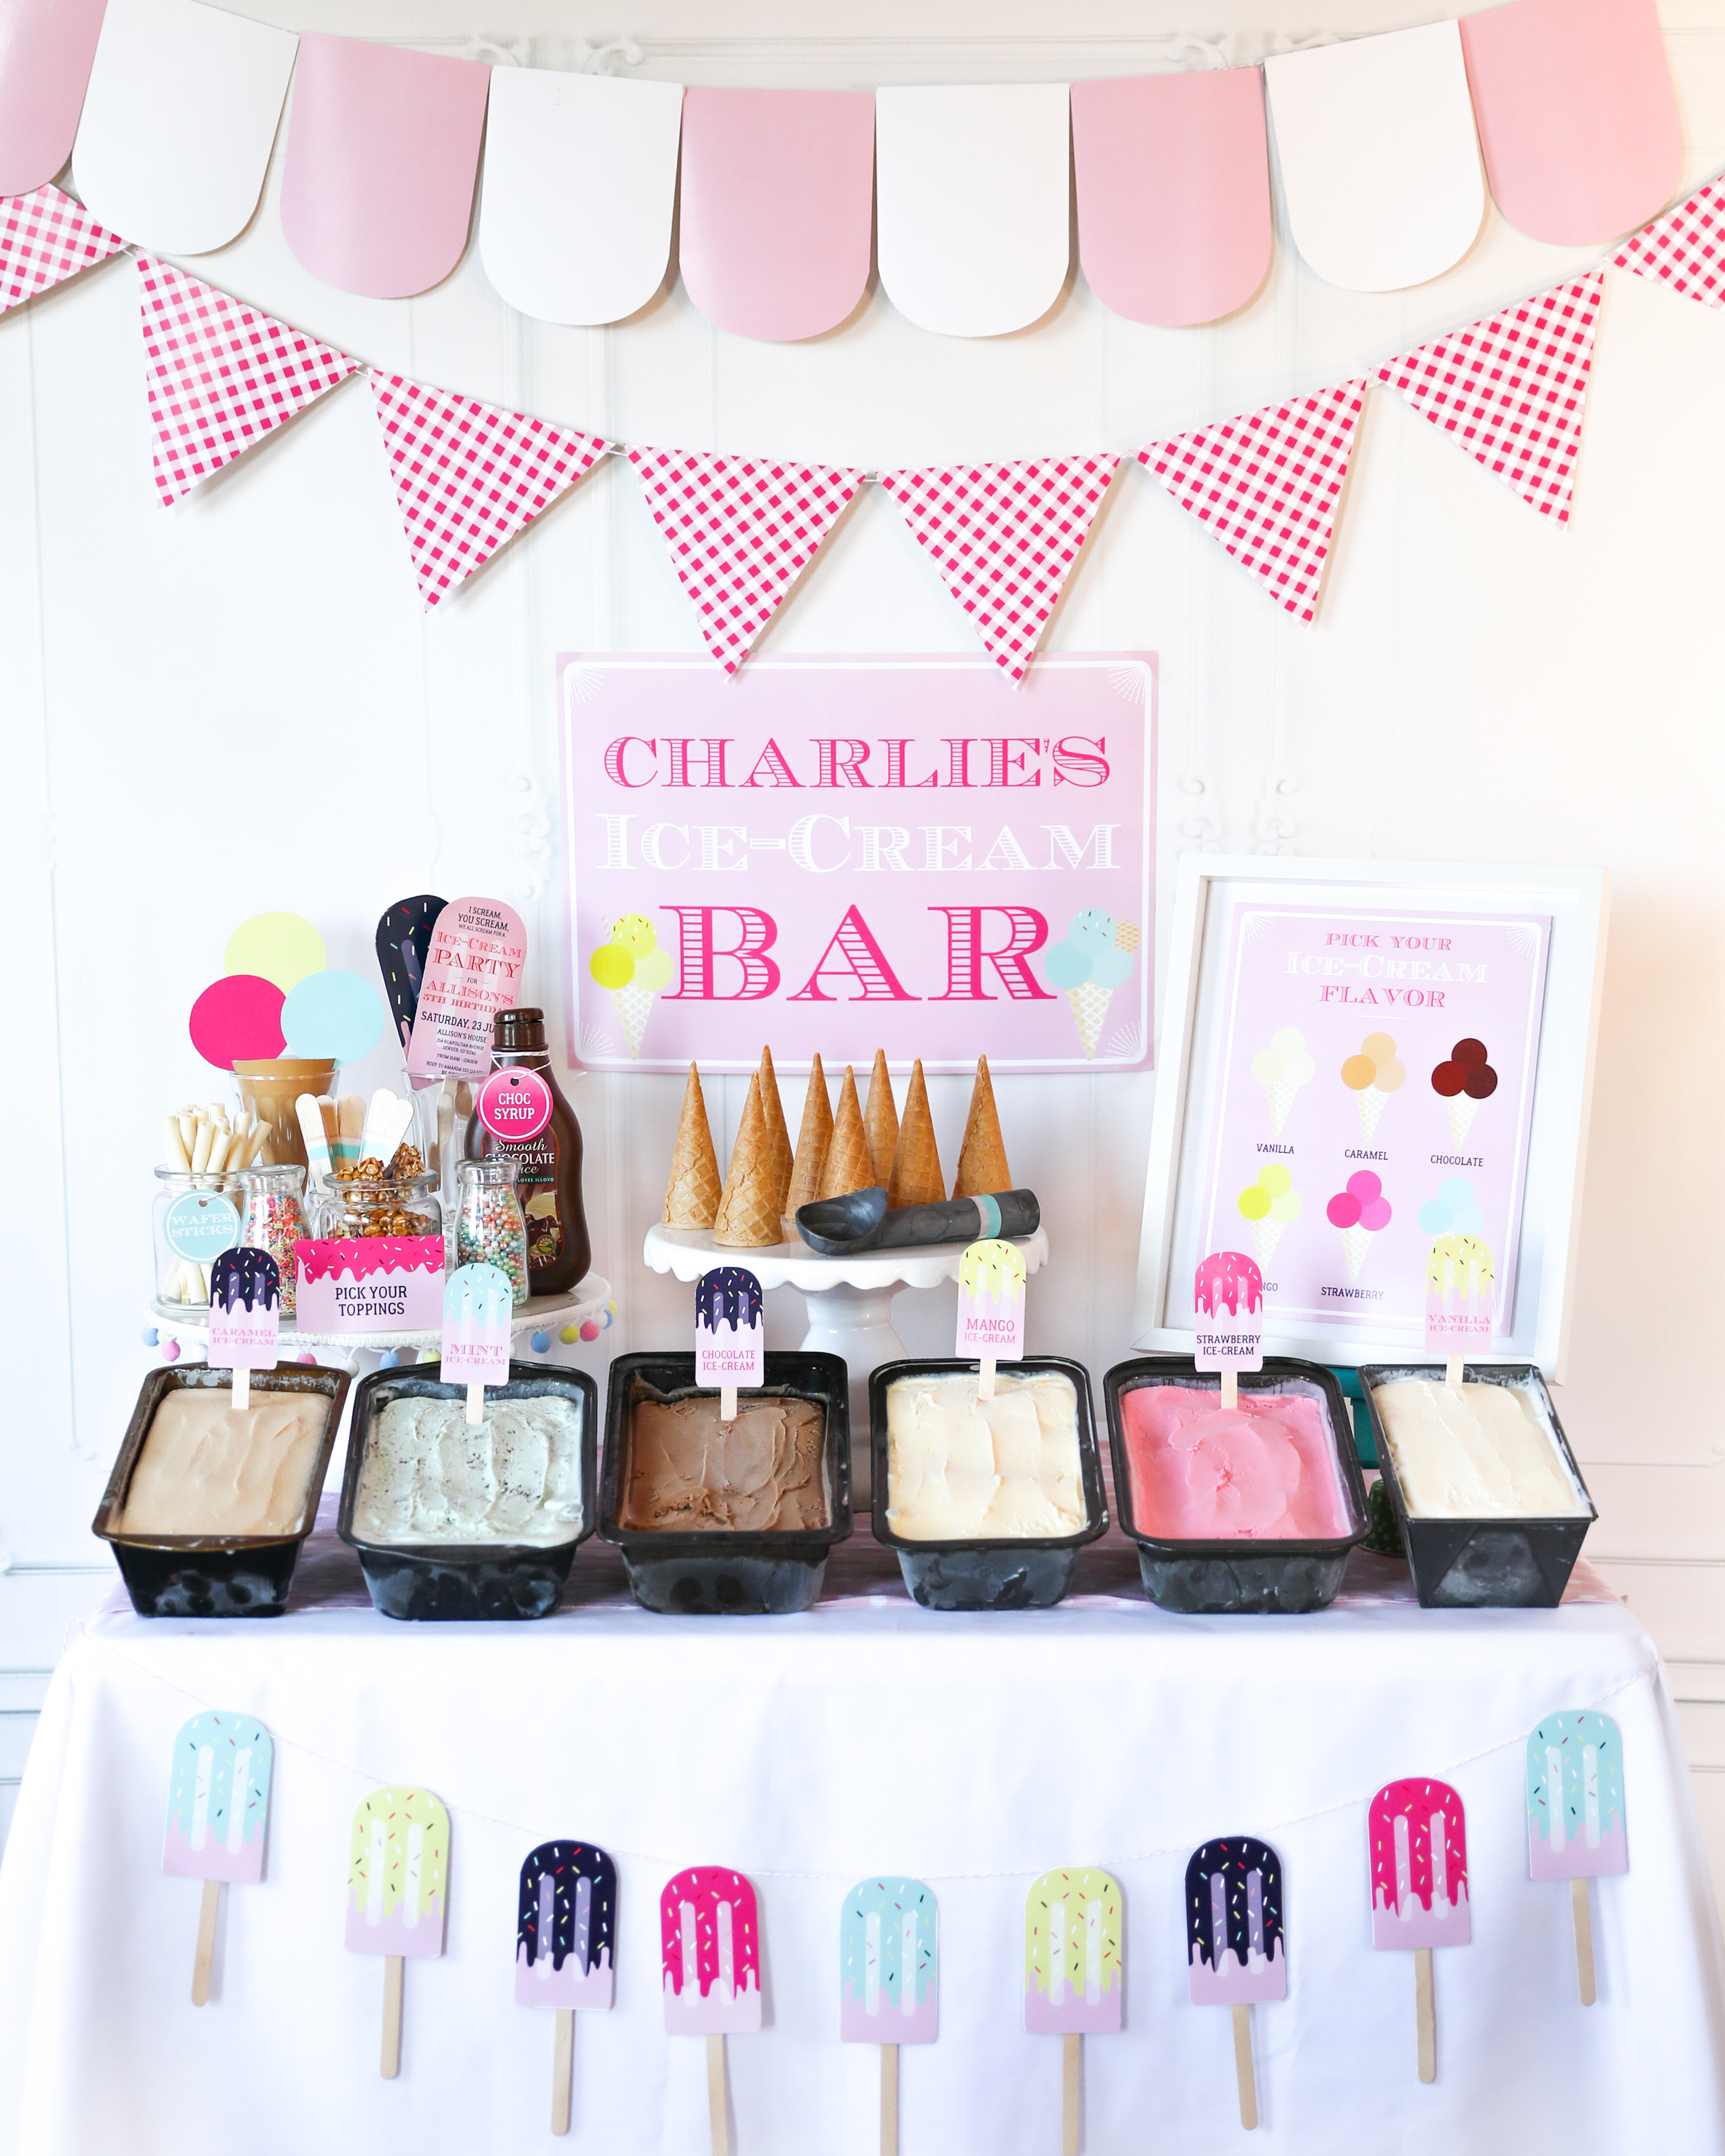 The sweetest Ice Cream Bar Station Printables DIY Ice-Cream Station - Step by Step!